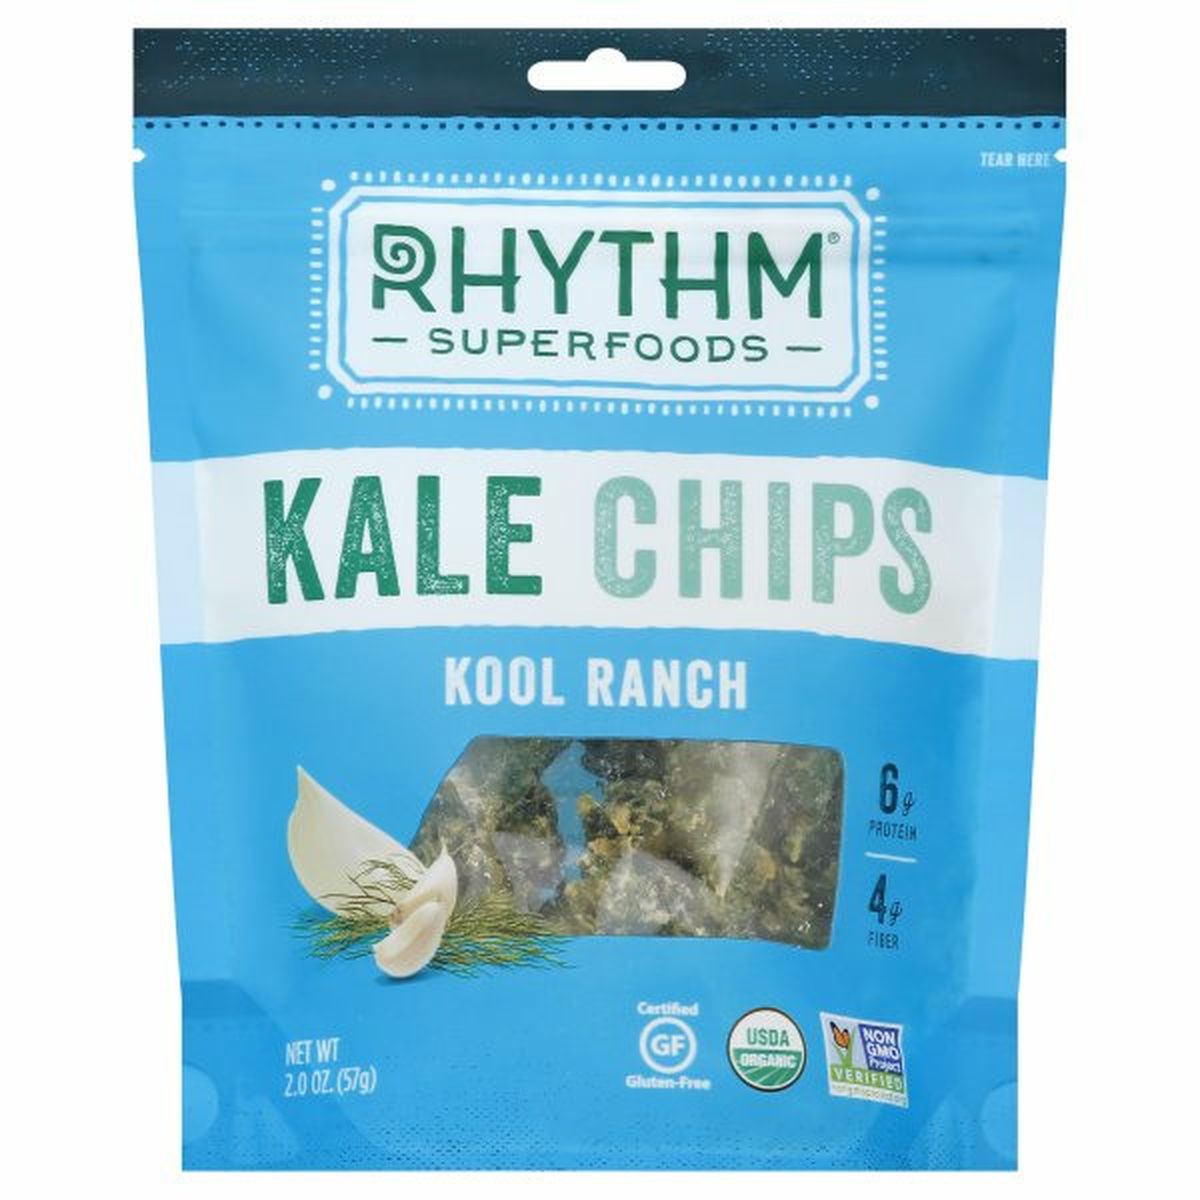 Calories in Rhythm Superfoods Kale Chips, Organic, Kool Ranch